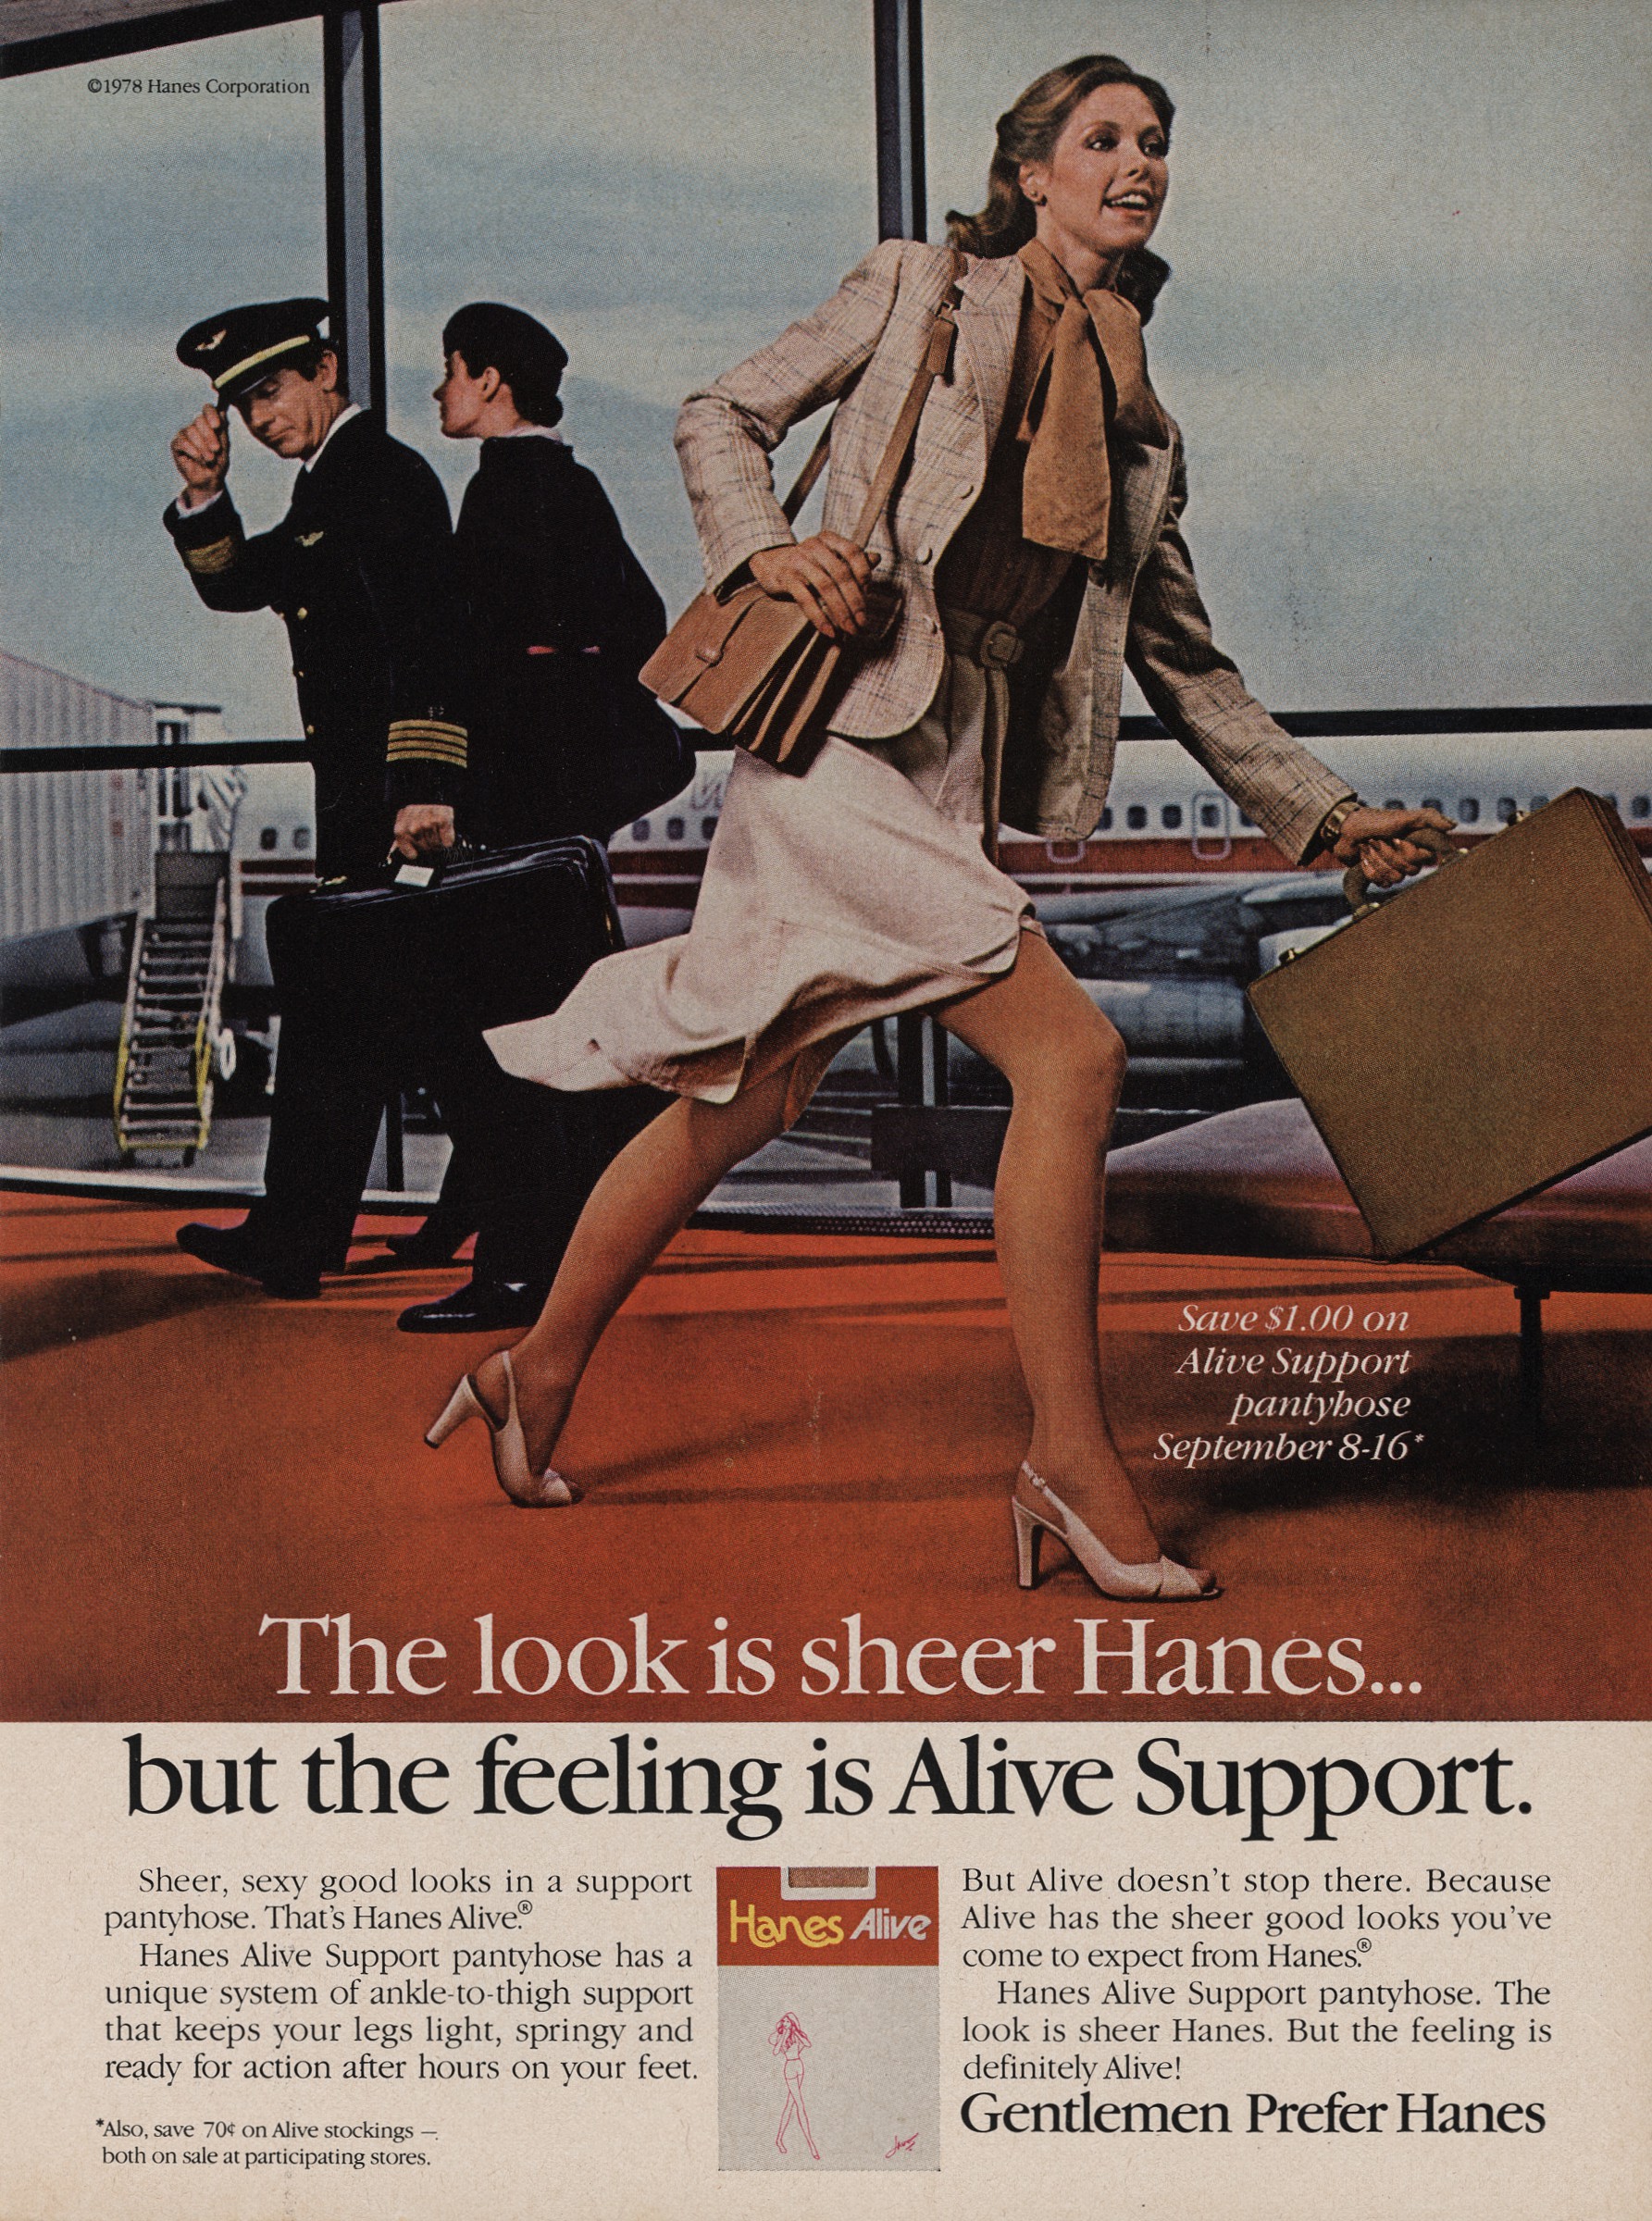 Hanes Alive Pantyhose LARGE Coupon 1980s Print Advertisement Ad